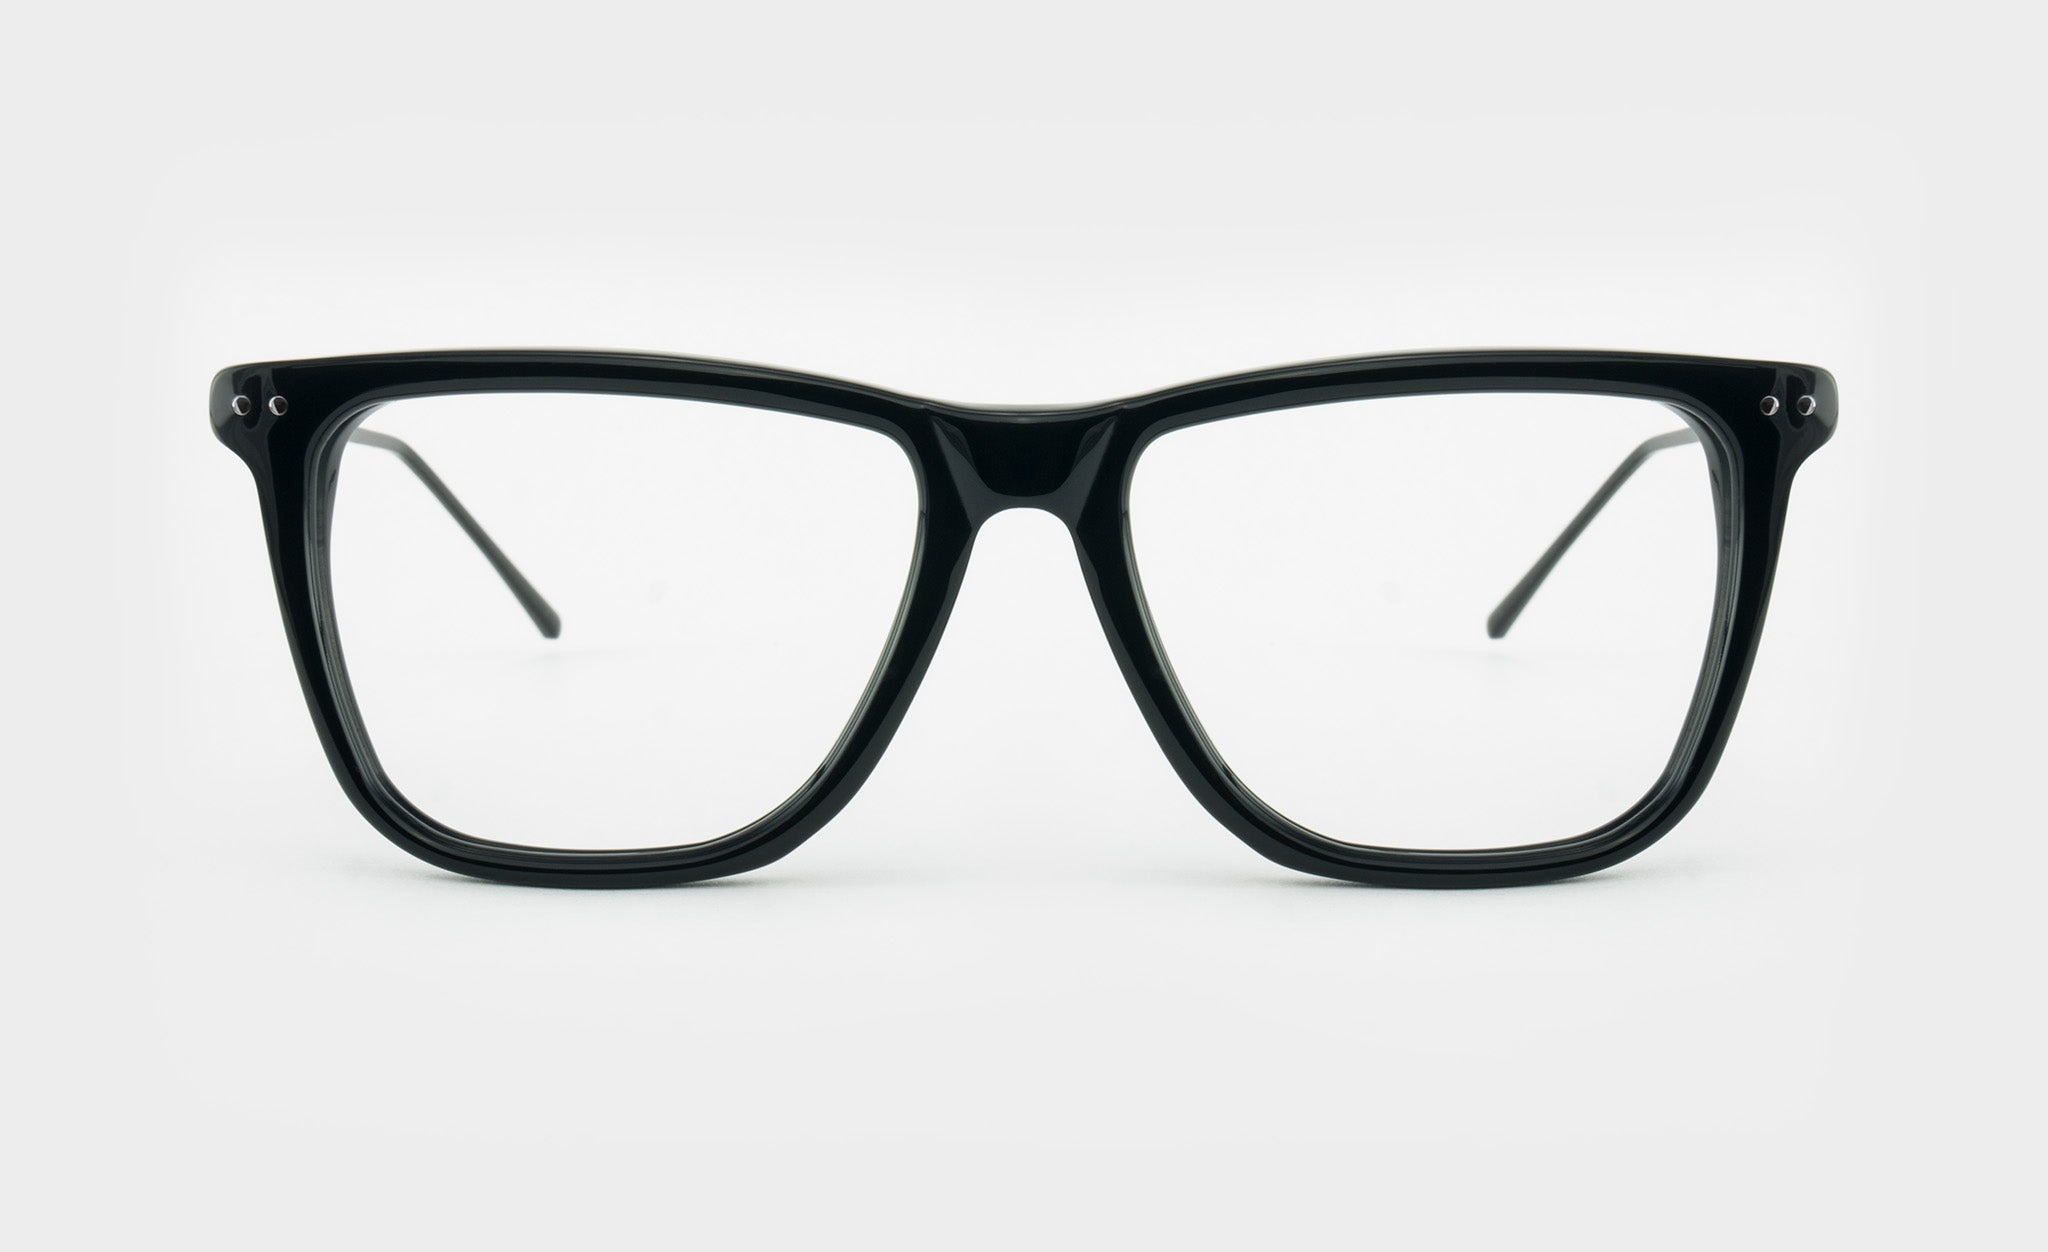 Front view of qquare black spectacle frame